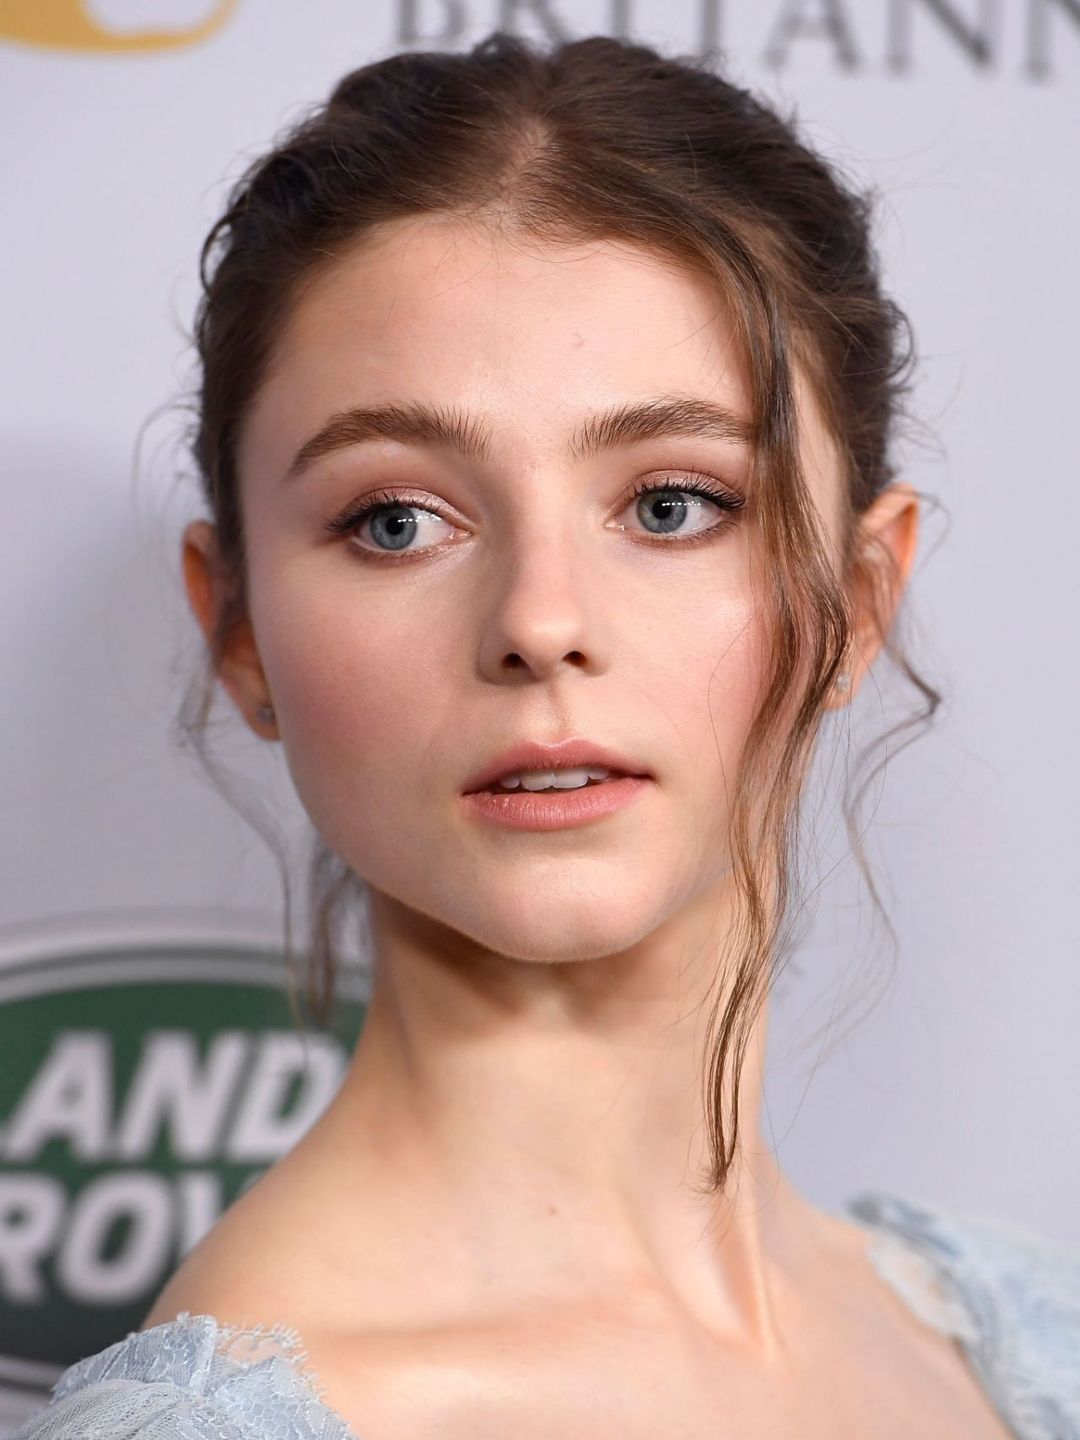 Thomasin McKenzie who is her father